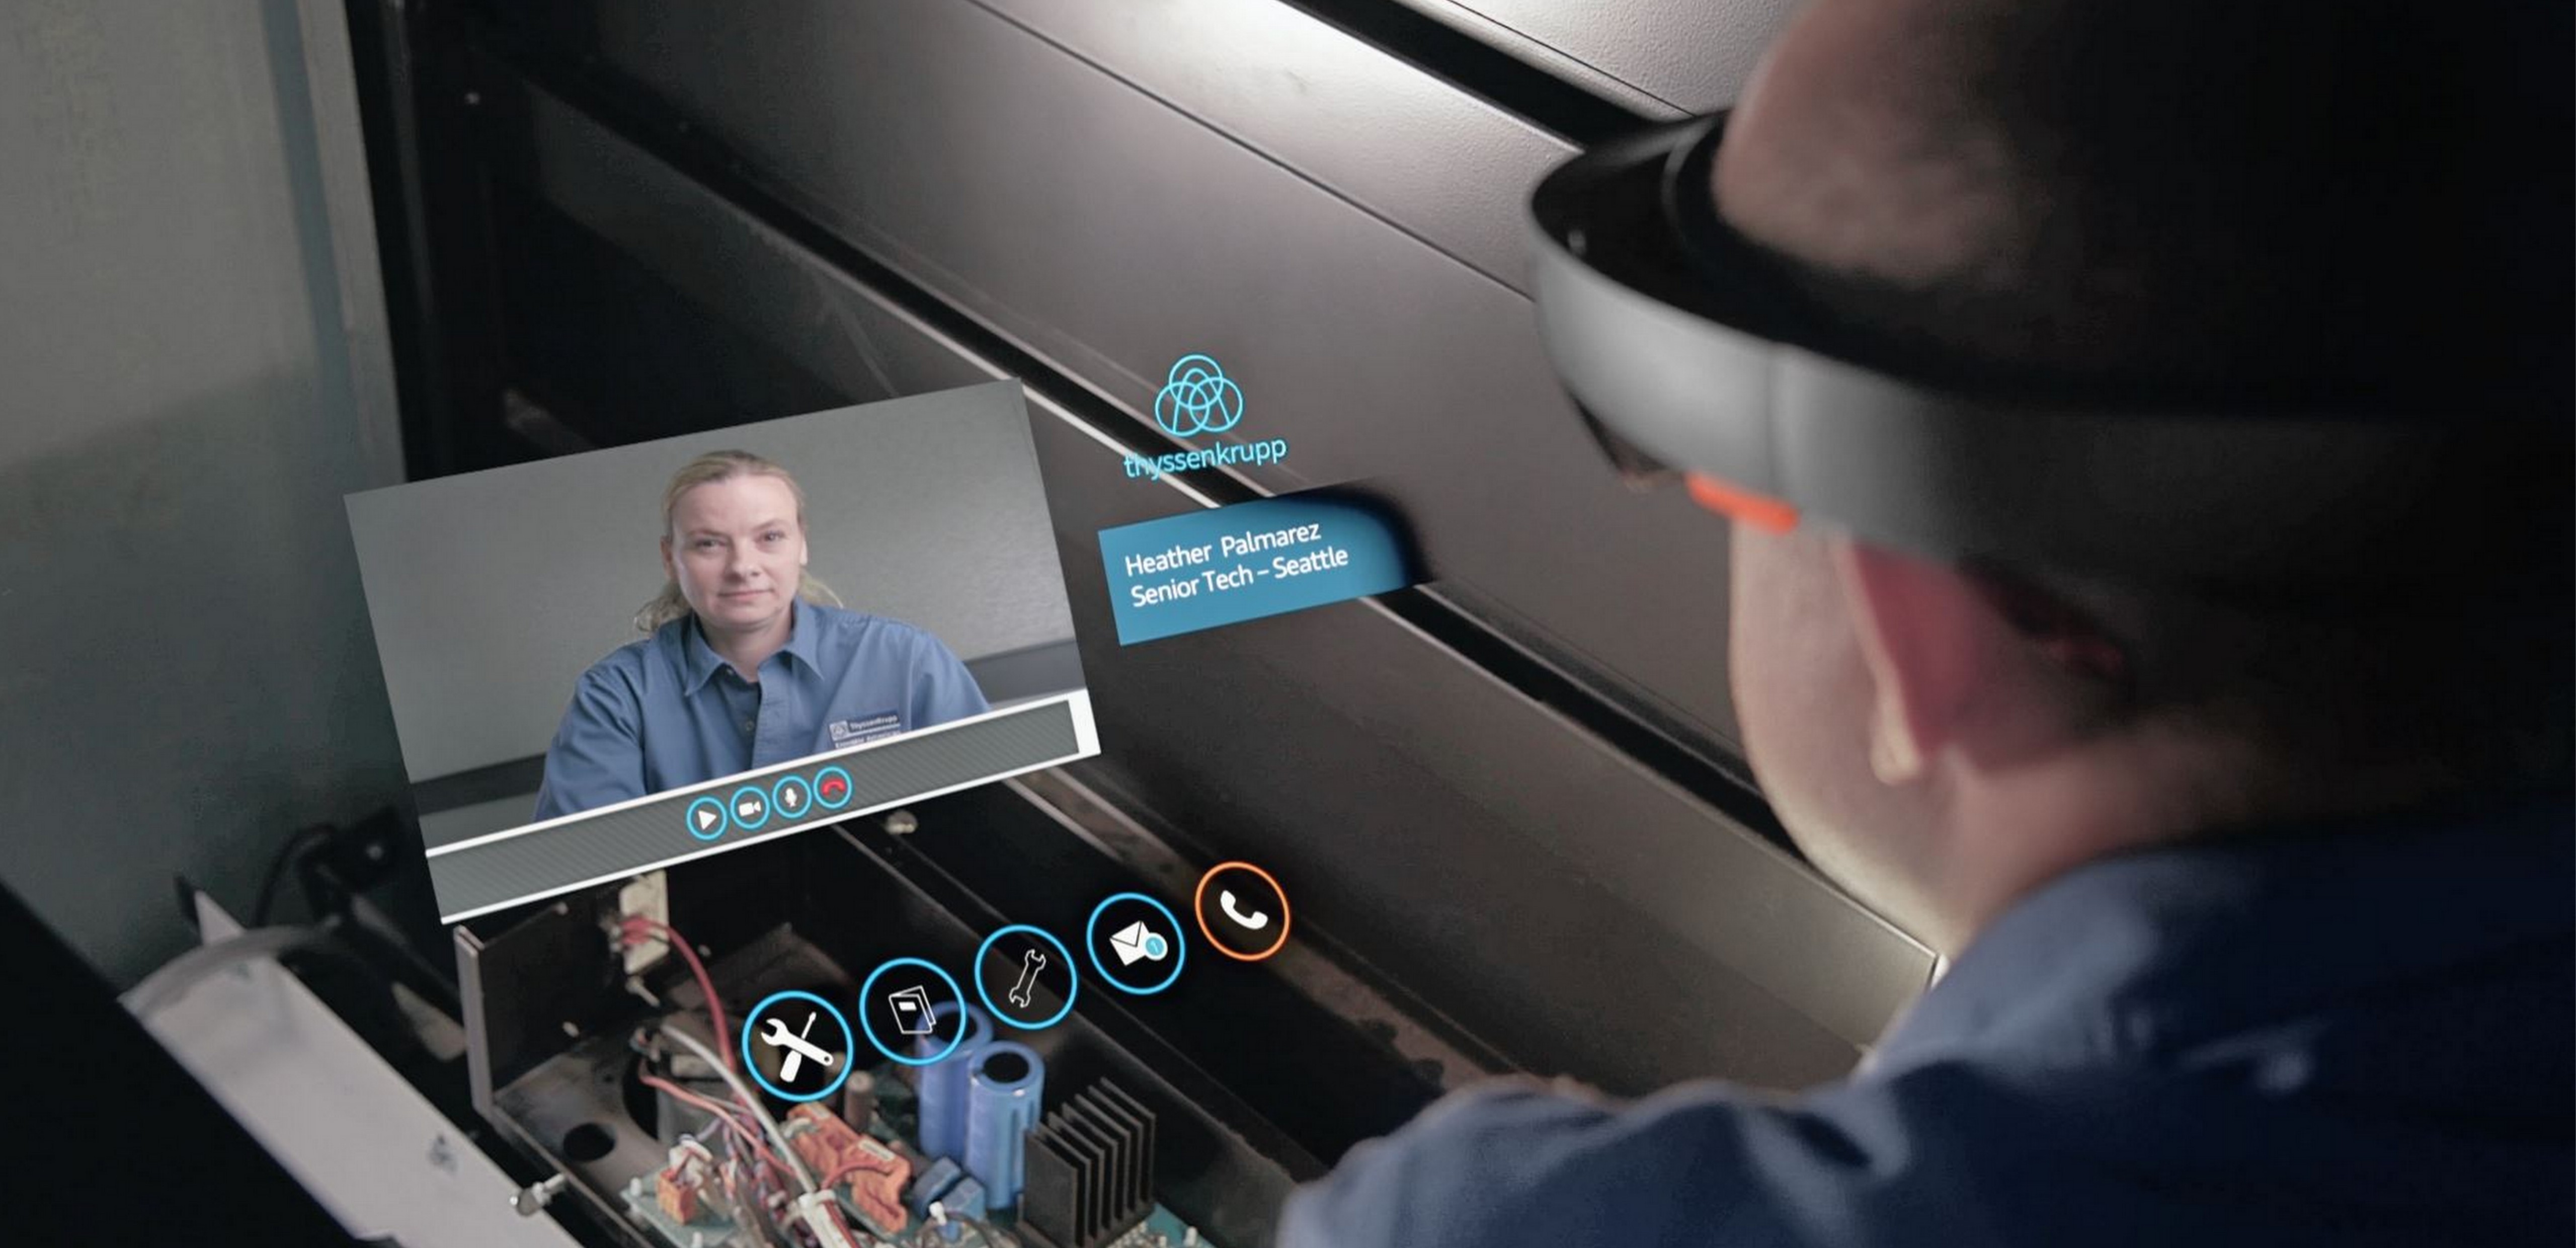 With Skype on HoloLens, technicians can be hands free while on the job, even when making remote calls to subject-matter experts and sharing holographic instructions between users.